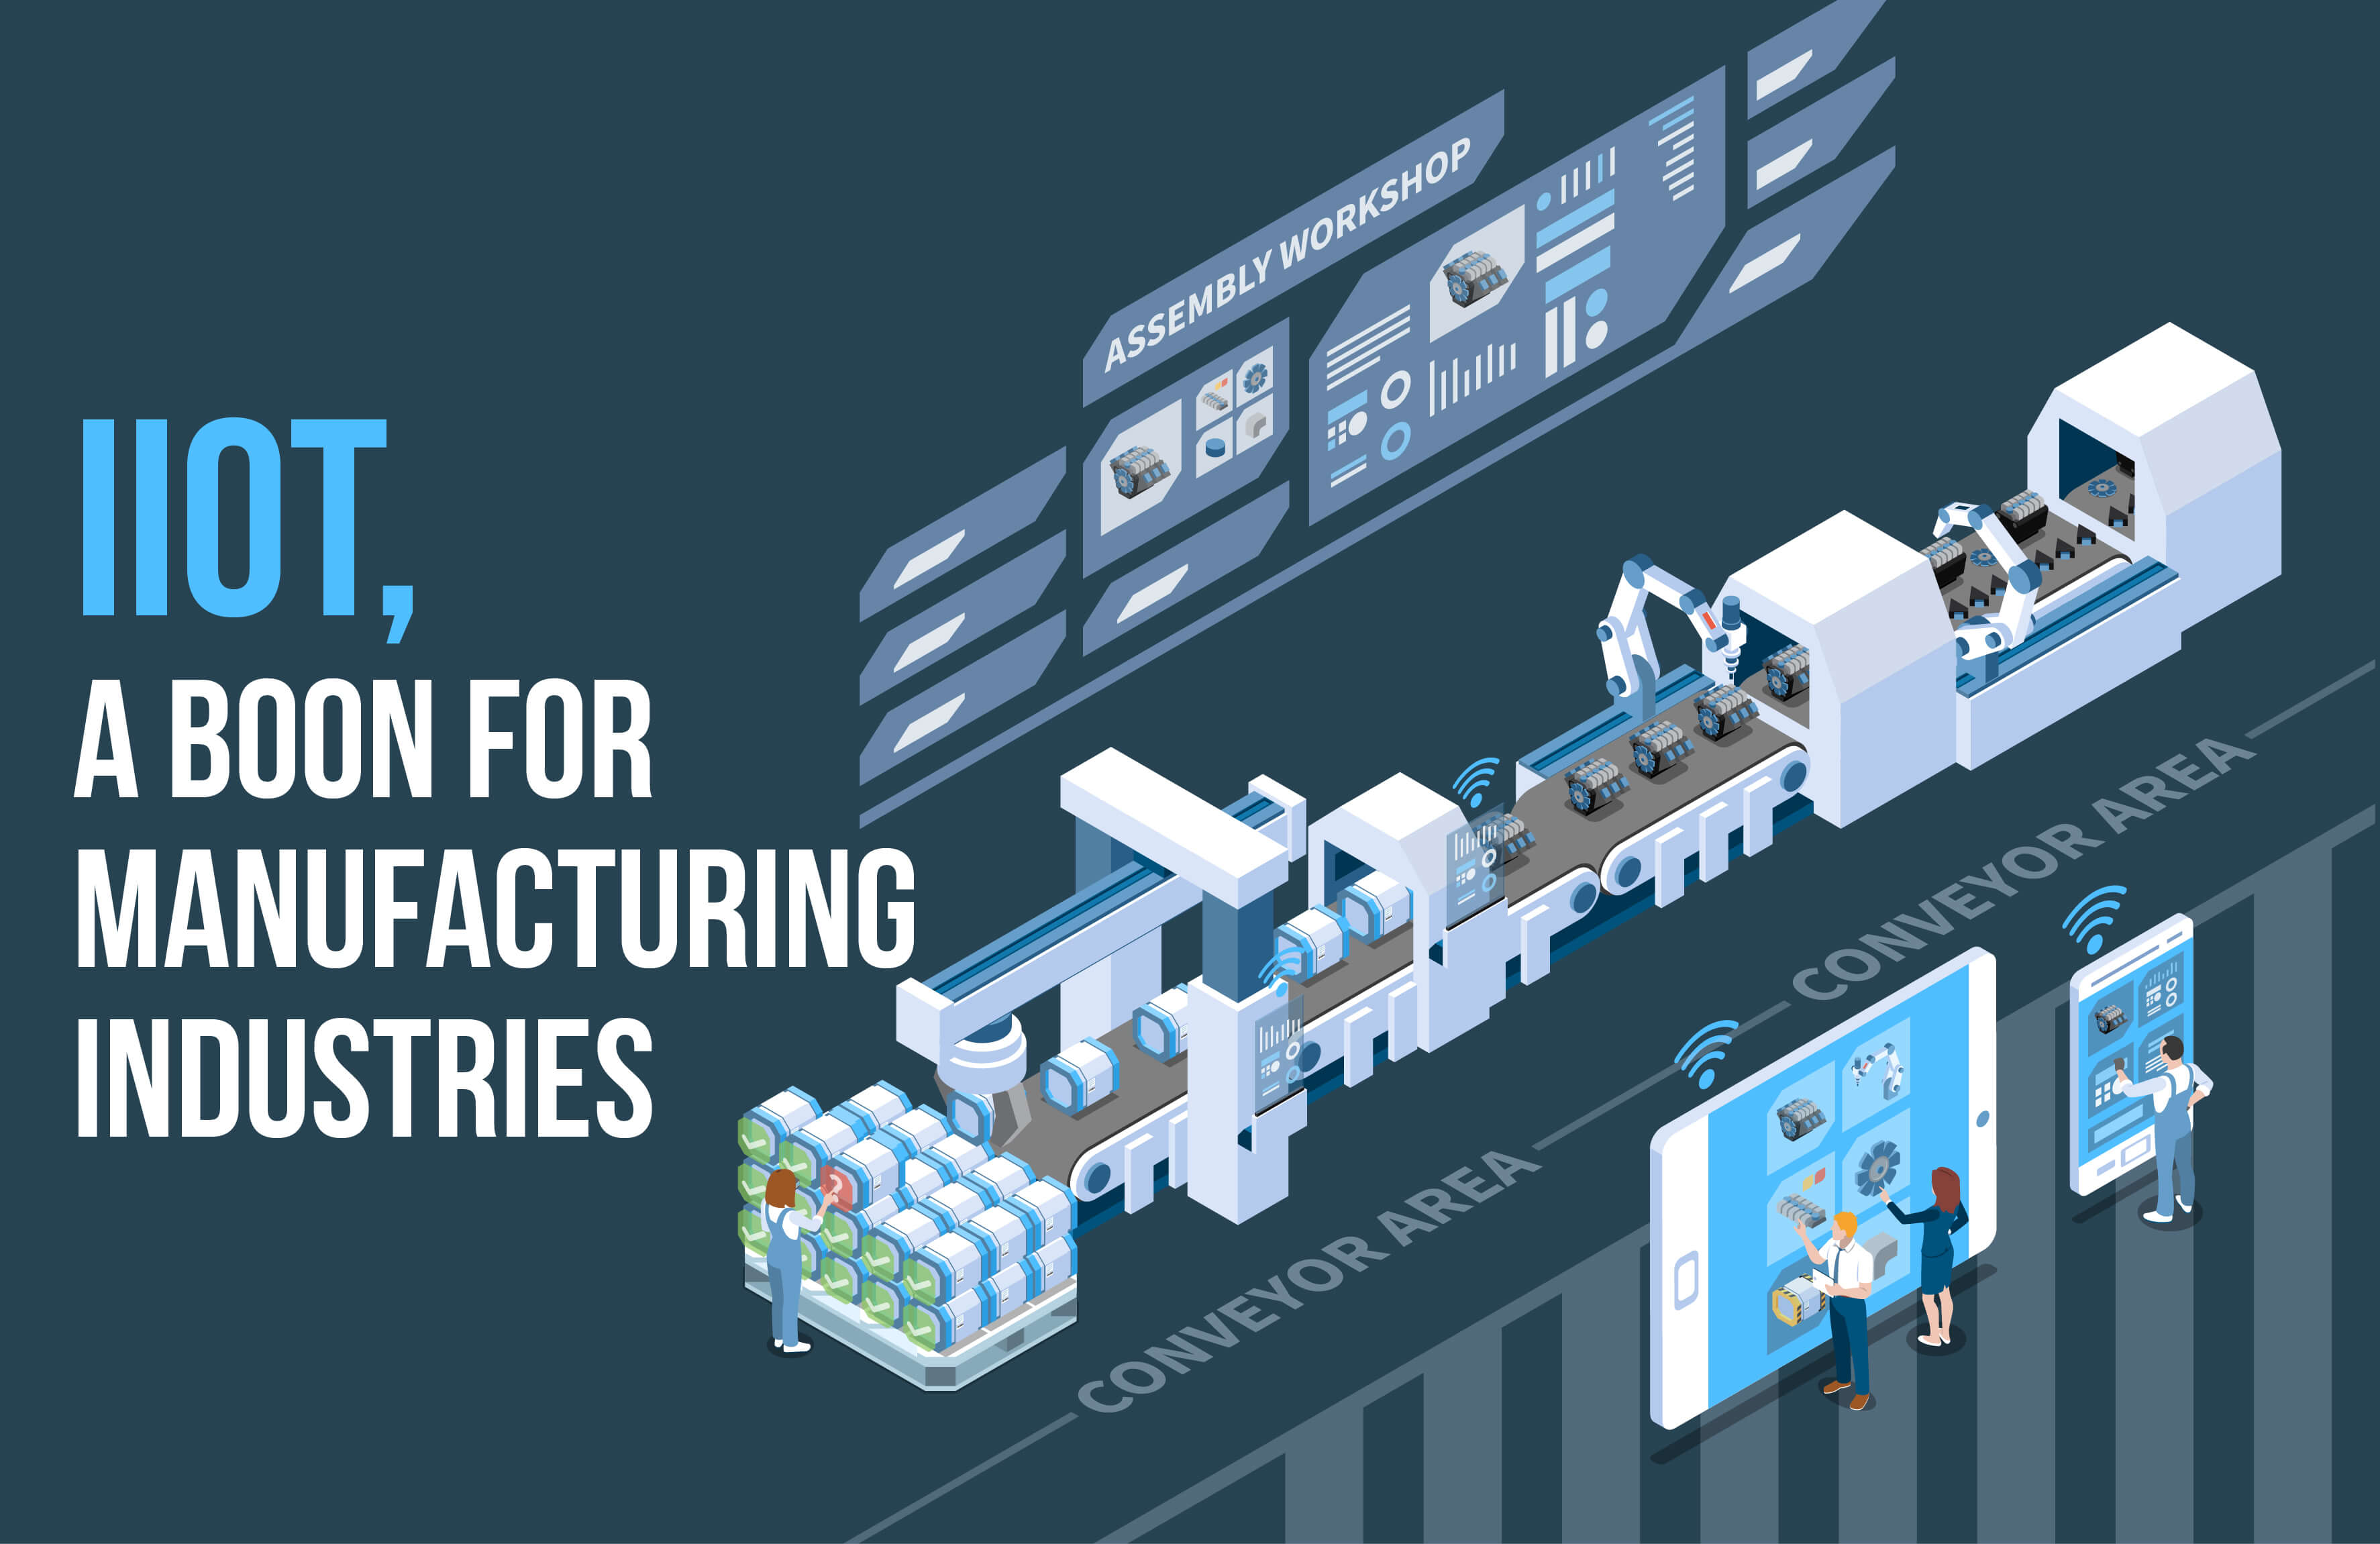 IIoT, a boon for Manufacturing Industries